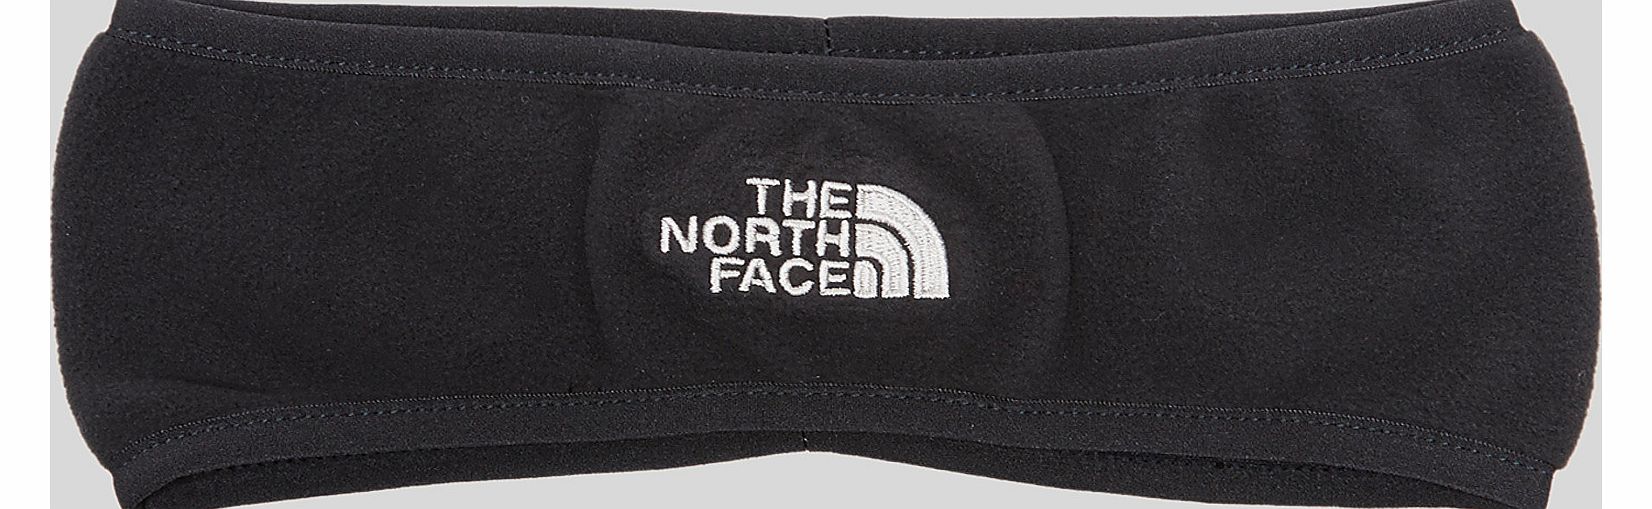 The North Face Ear Gear Band